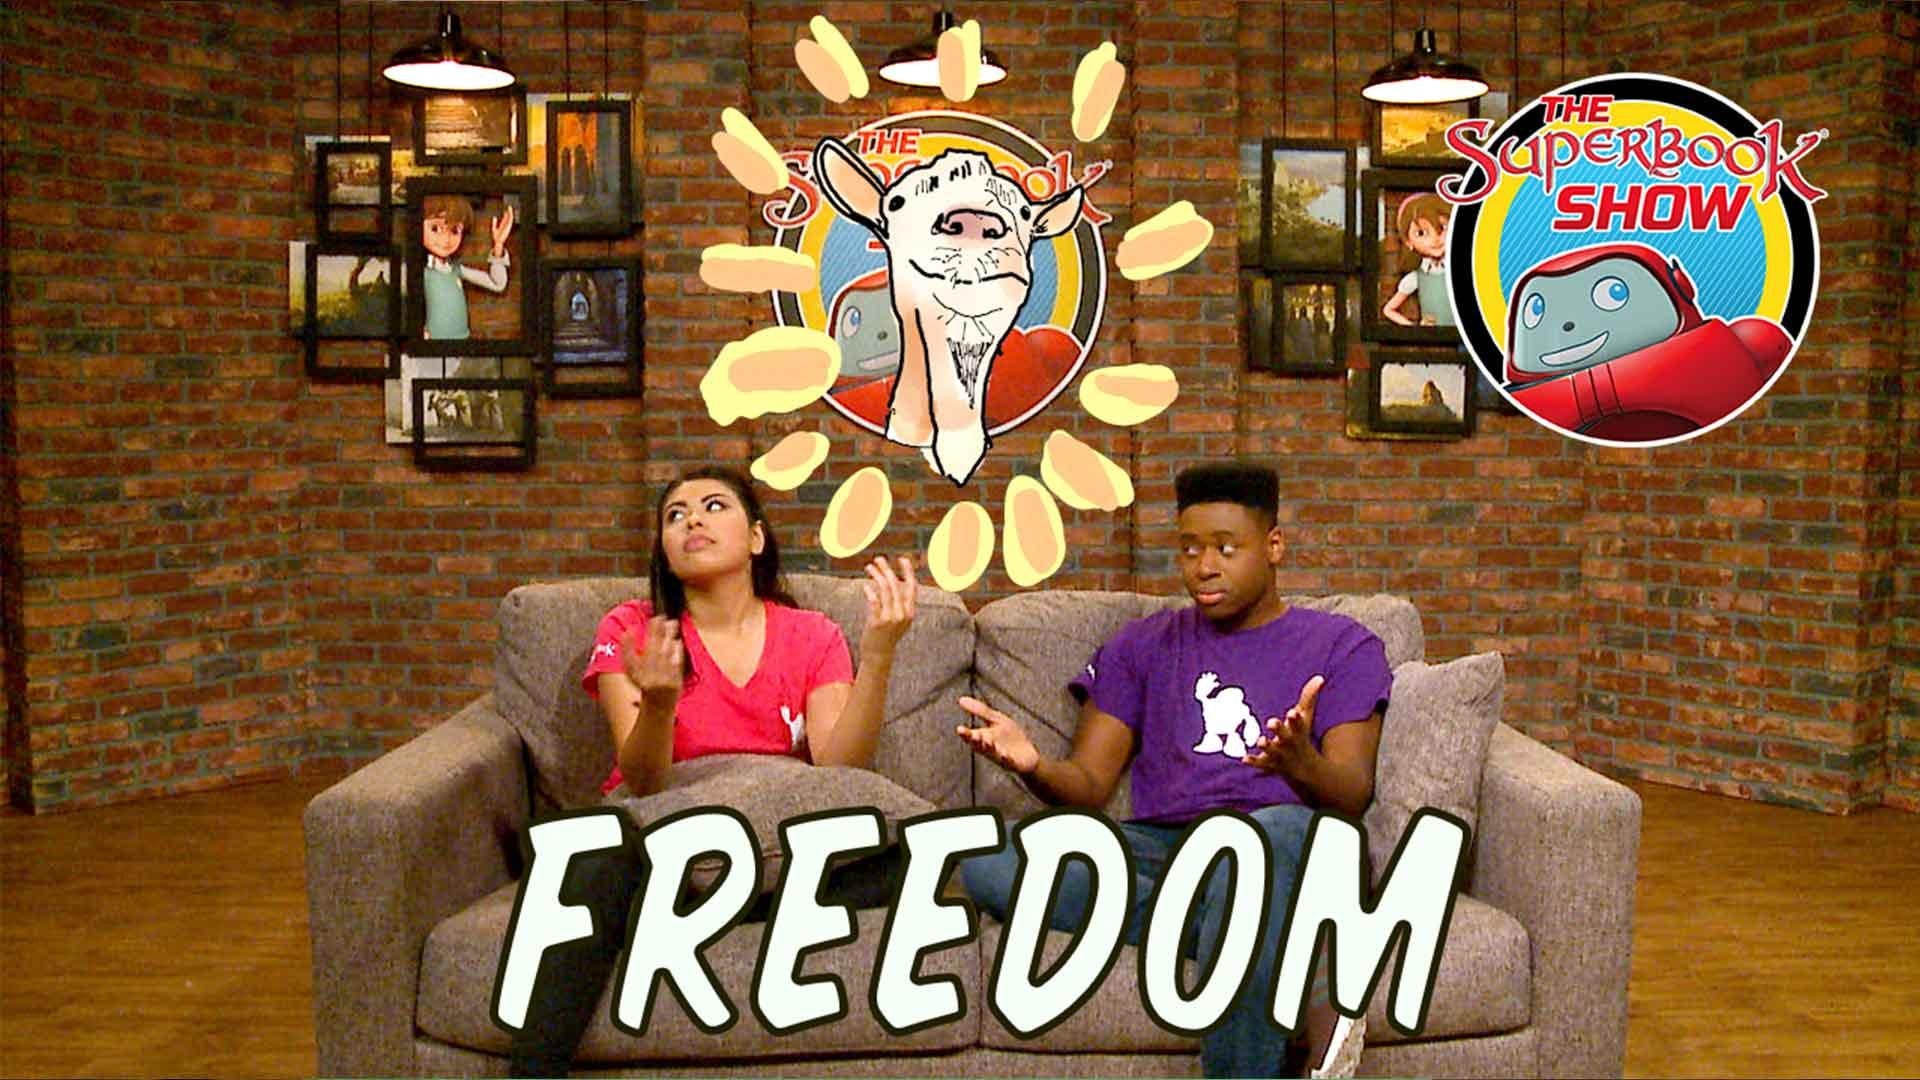 Freedom! - The Superbook Show